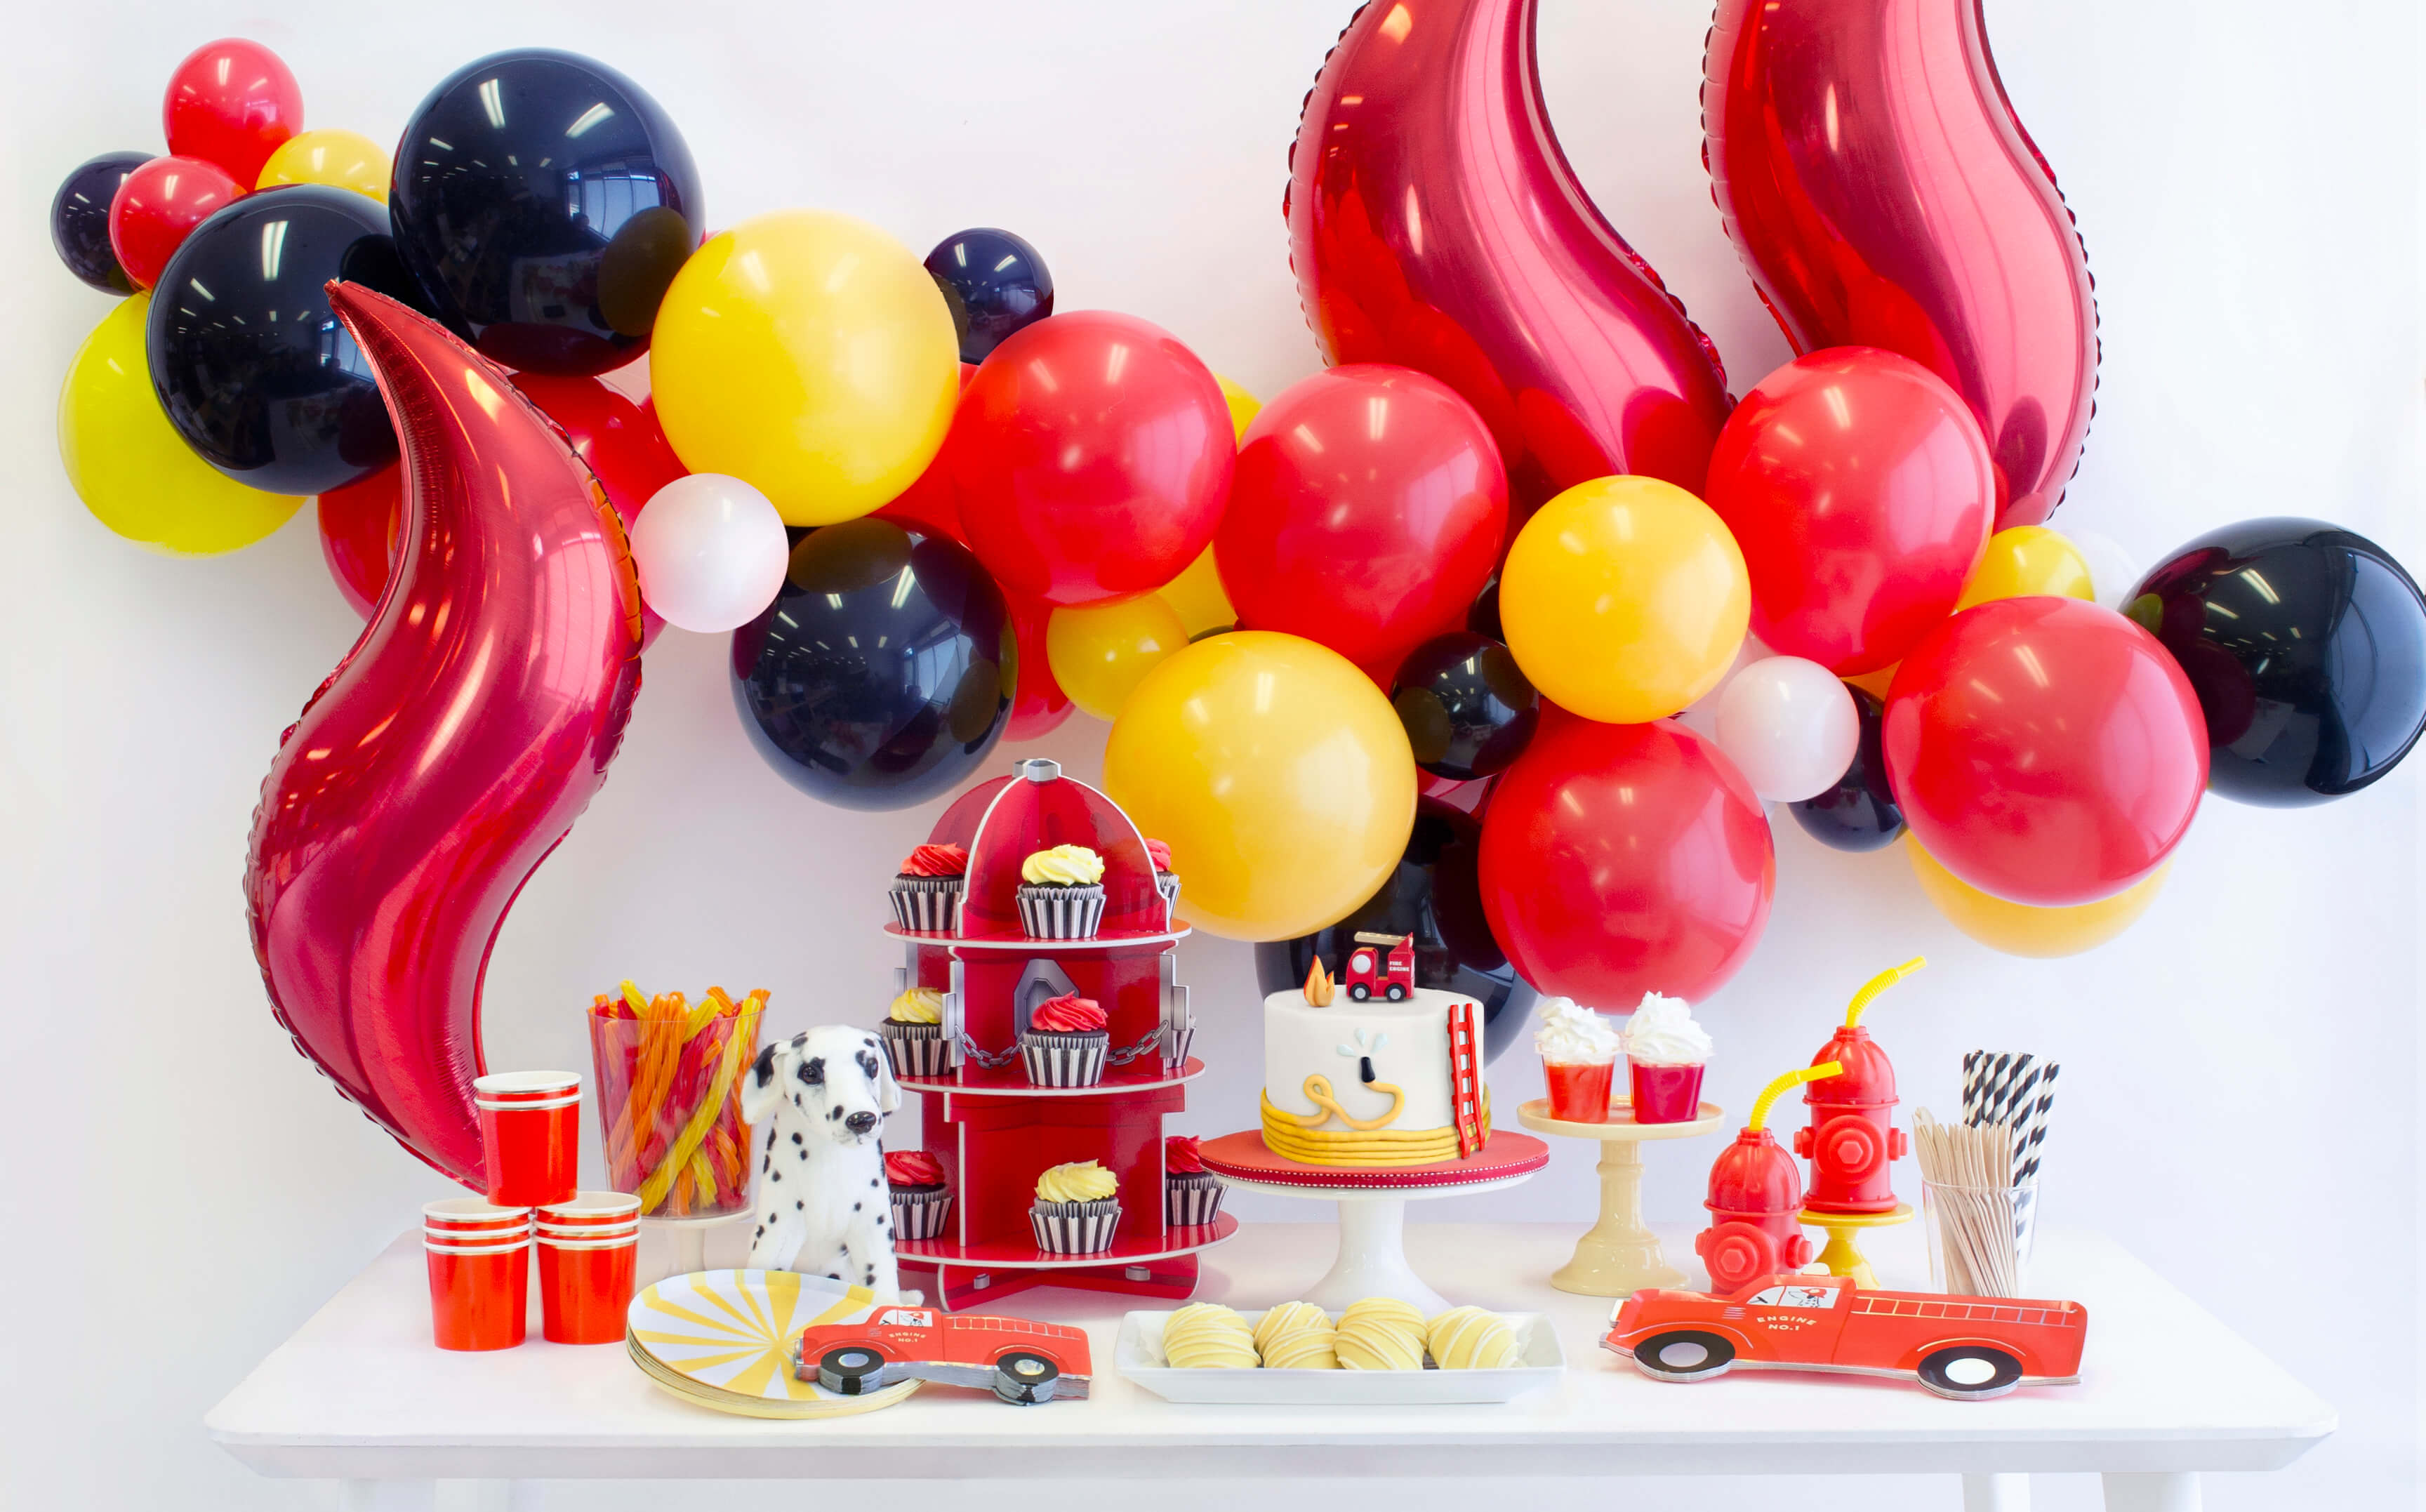 Kid's Fire Truck Fire Fighter Fire Engine Themed Birthday Party Ideas by Momo Party